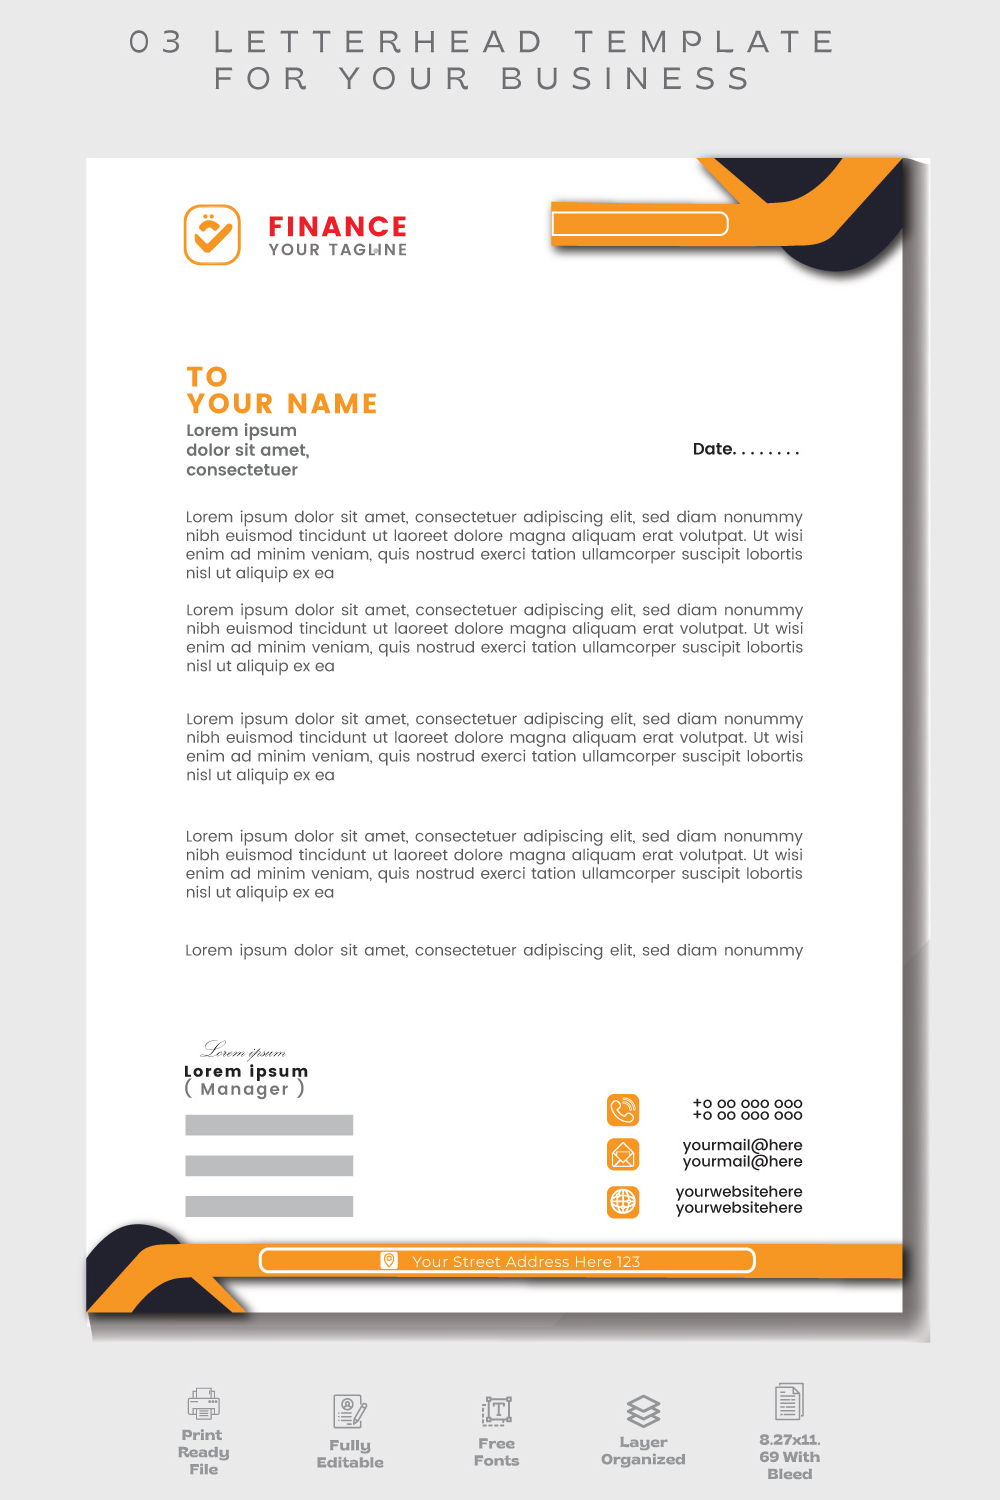 03 Modern letterhead template | Letterhead template design for your businessProfessional Letterhead Template for your Business Very Easy To customize for every file pinterest preview image.